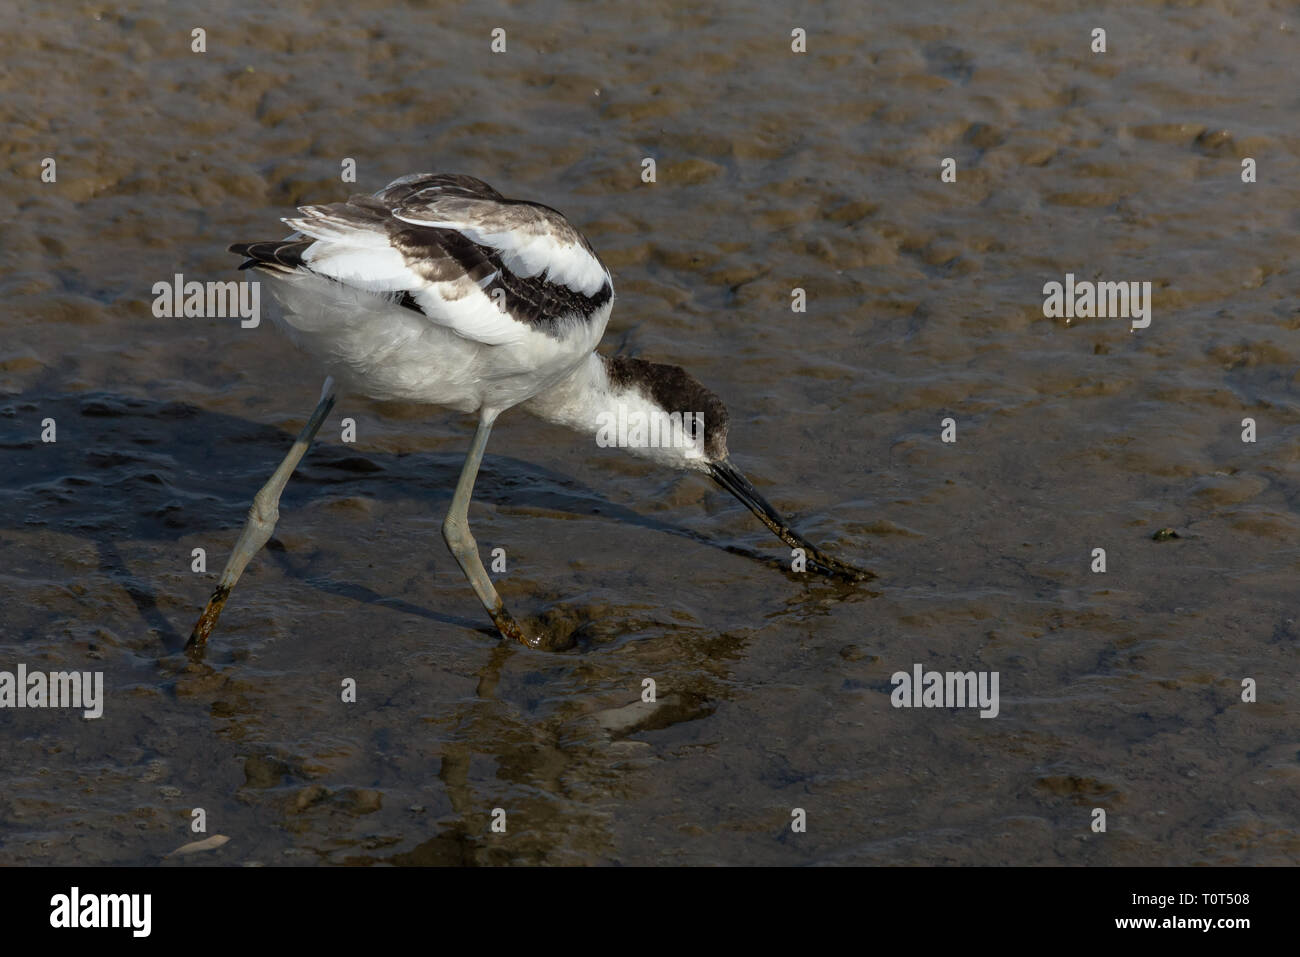 Avocet sifting through the mud. Stock Photo